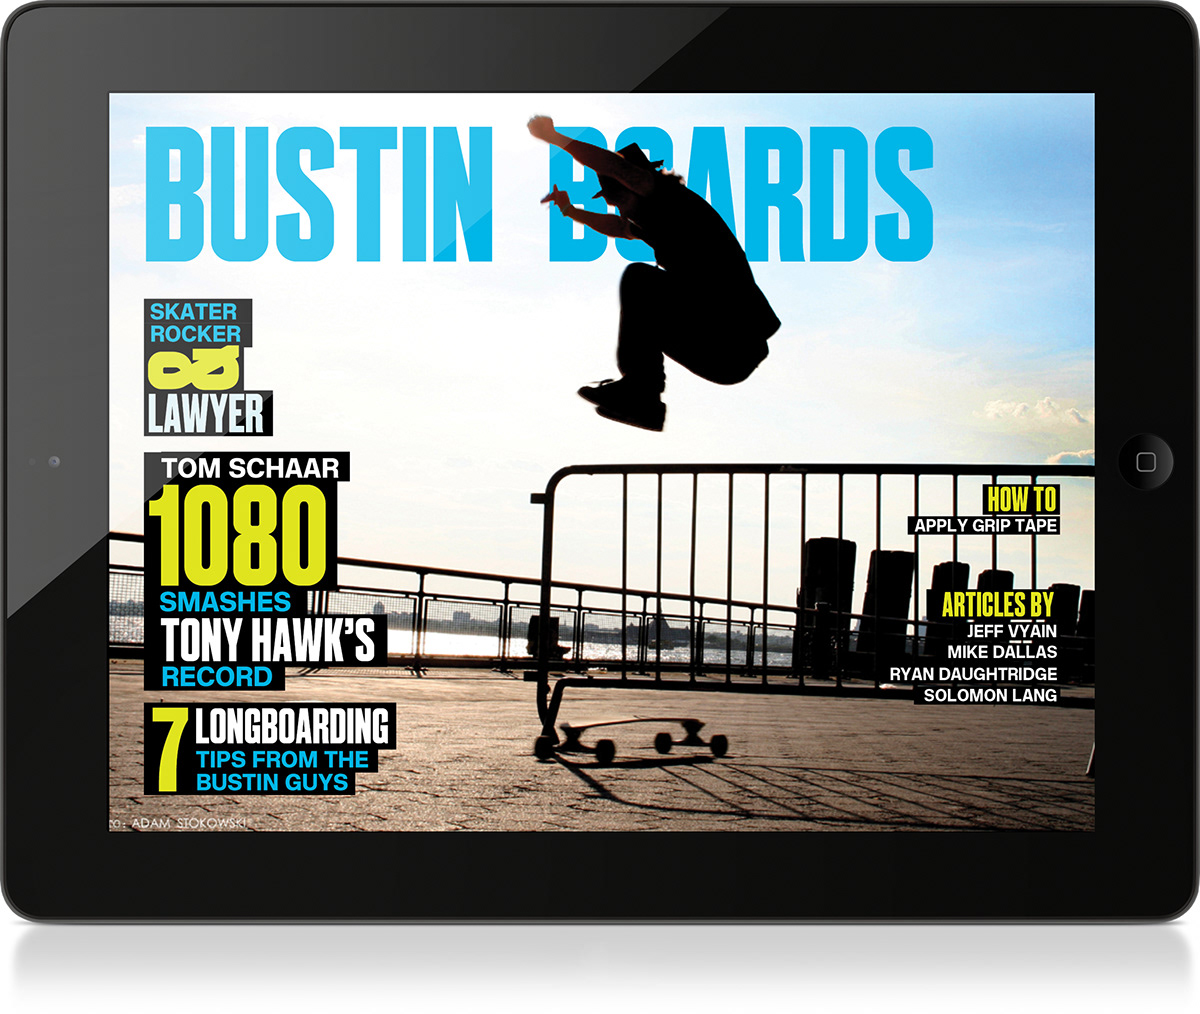 bustin boards info-graphic poster